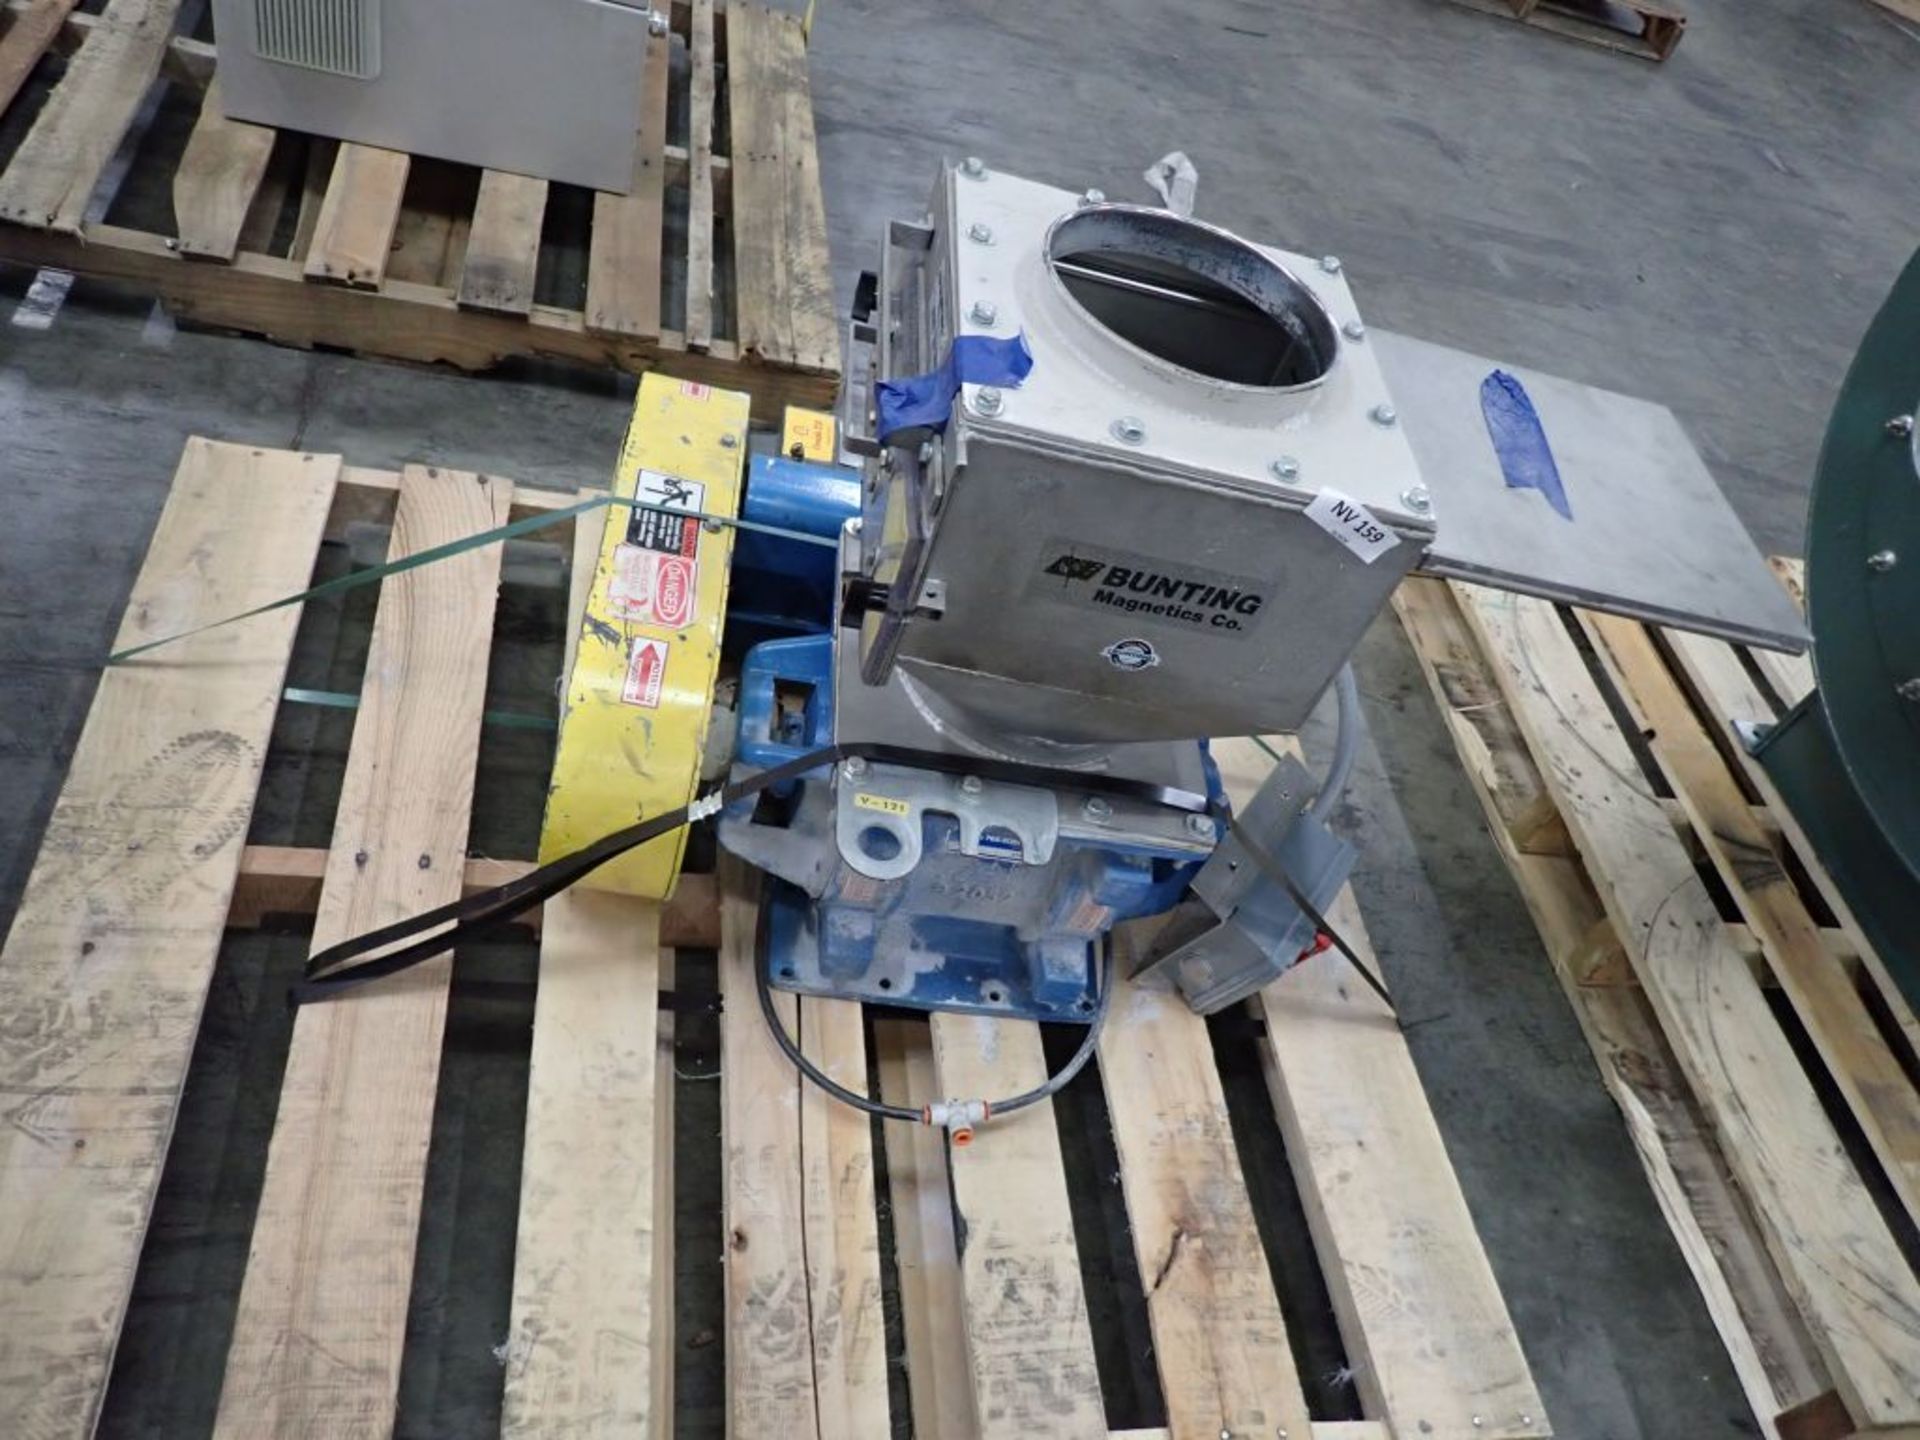 Rotary Feeder with Bunting Magnetics Magnetic Separator Ancaster Conveying System - Image 5 of 13